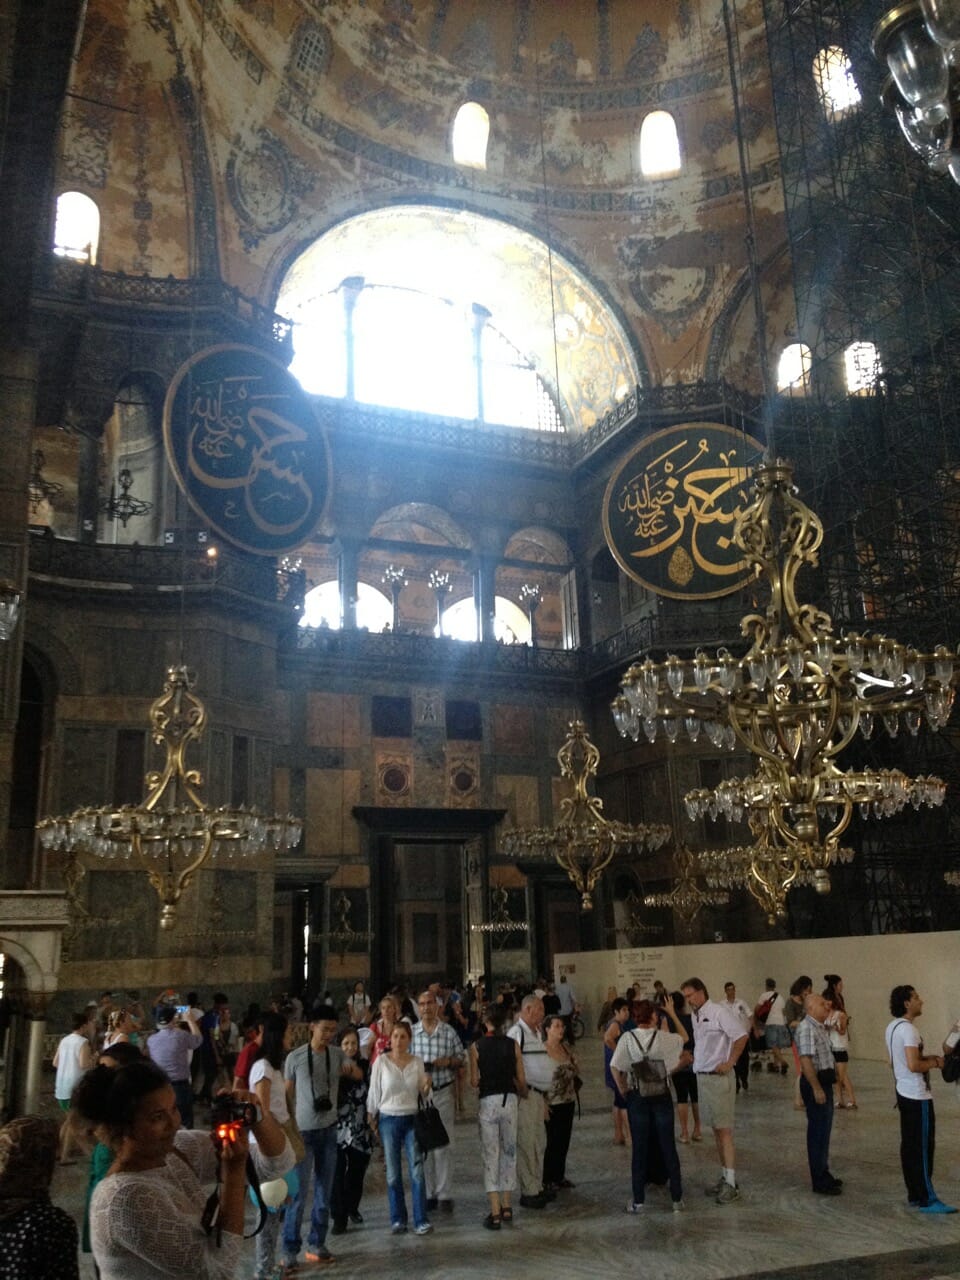 People inside Hagia Sophia and some of its chandeliers, Istanbul.